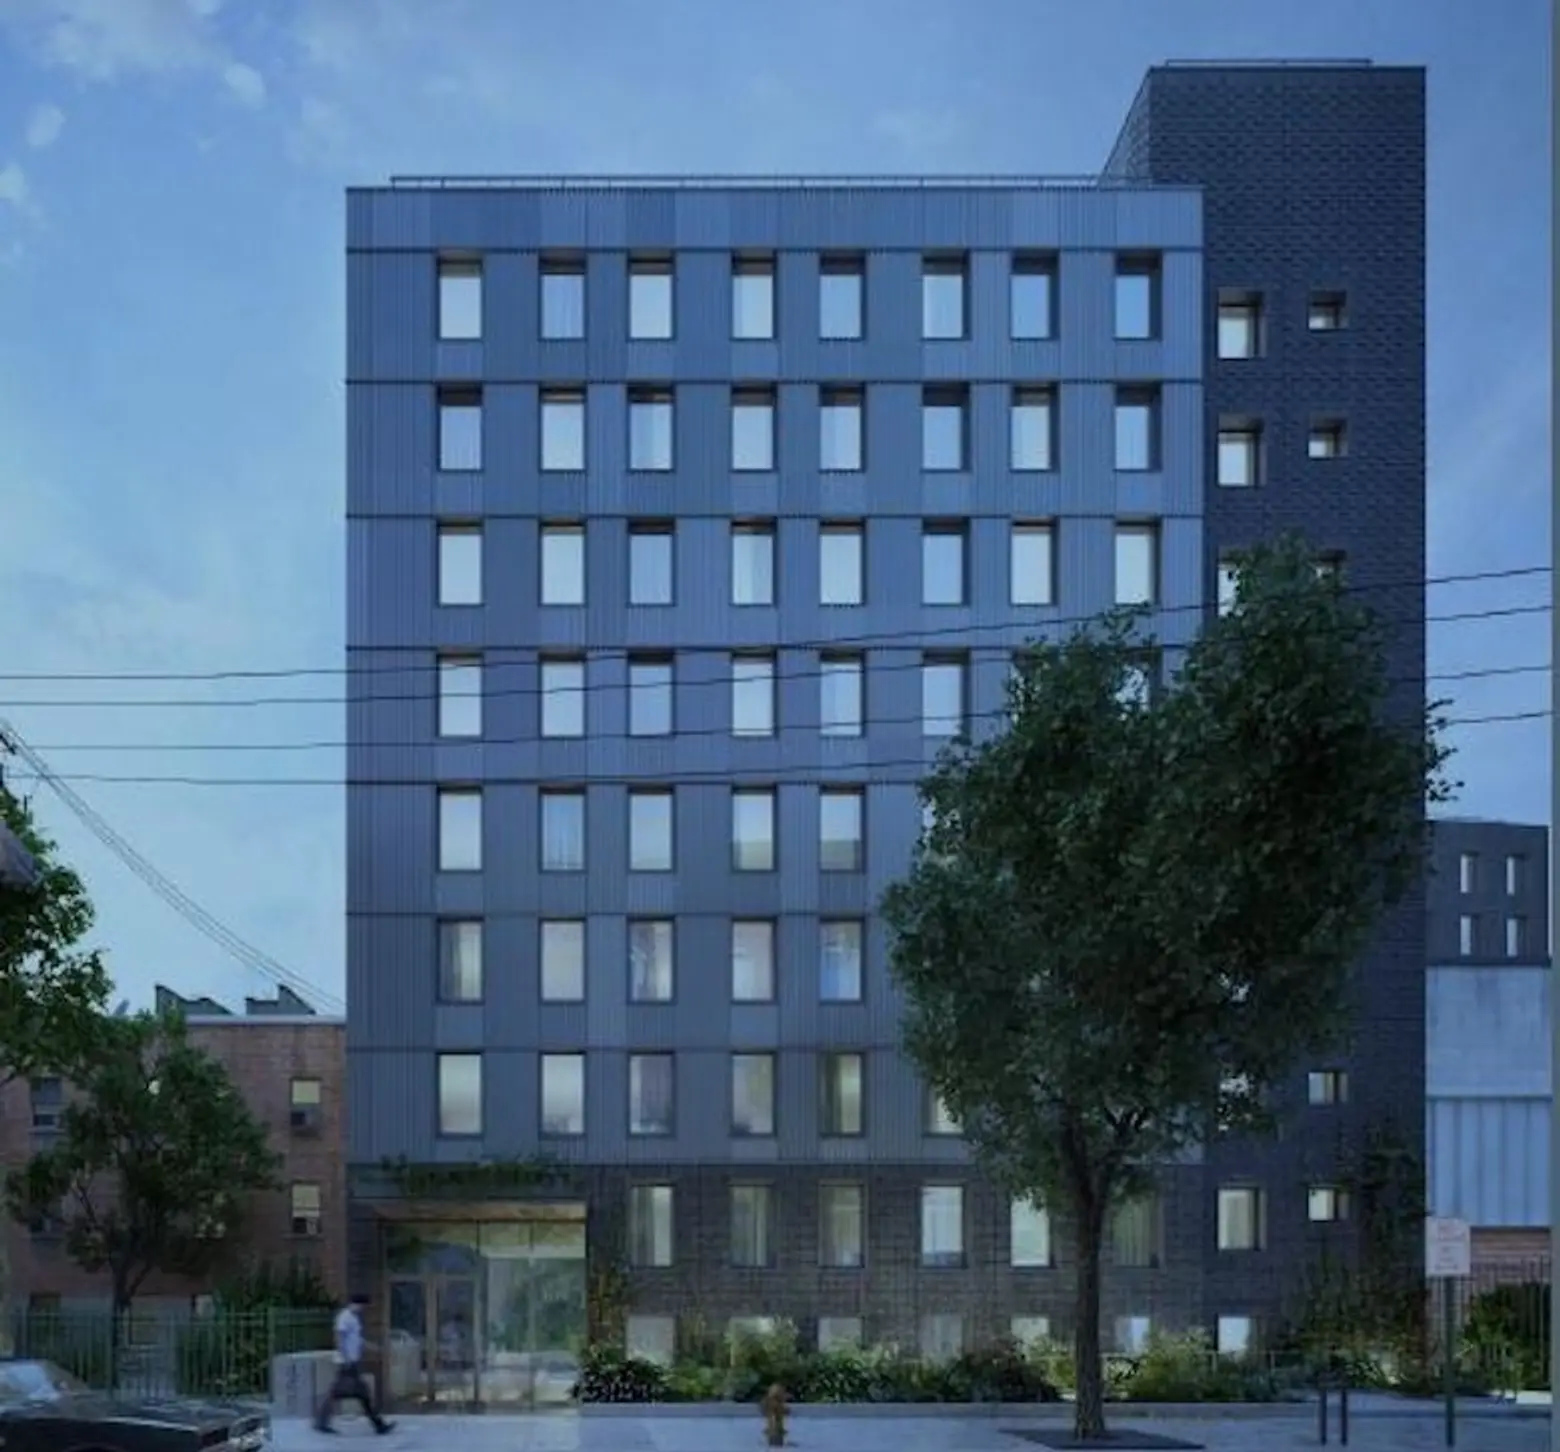 78 affordable senior units available at supportive Passive House residence in the South Bronx